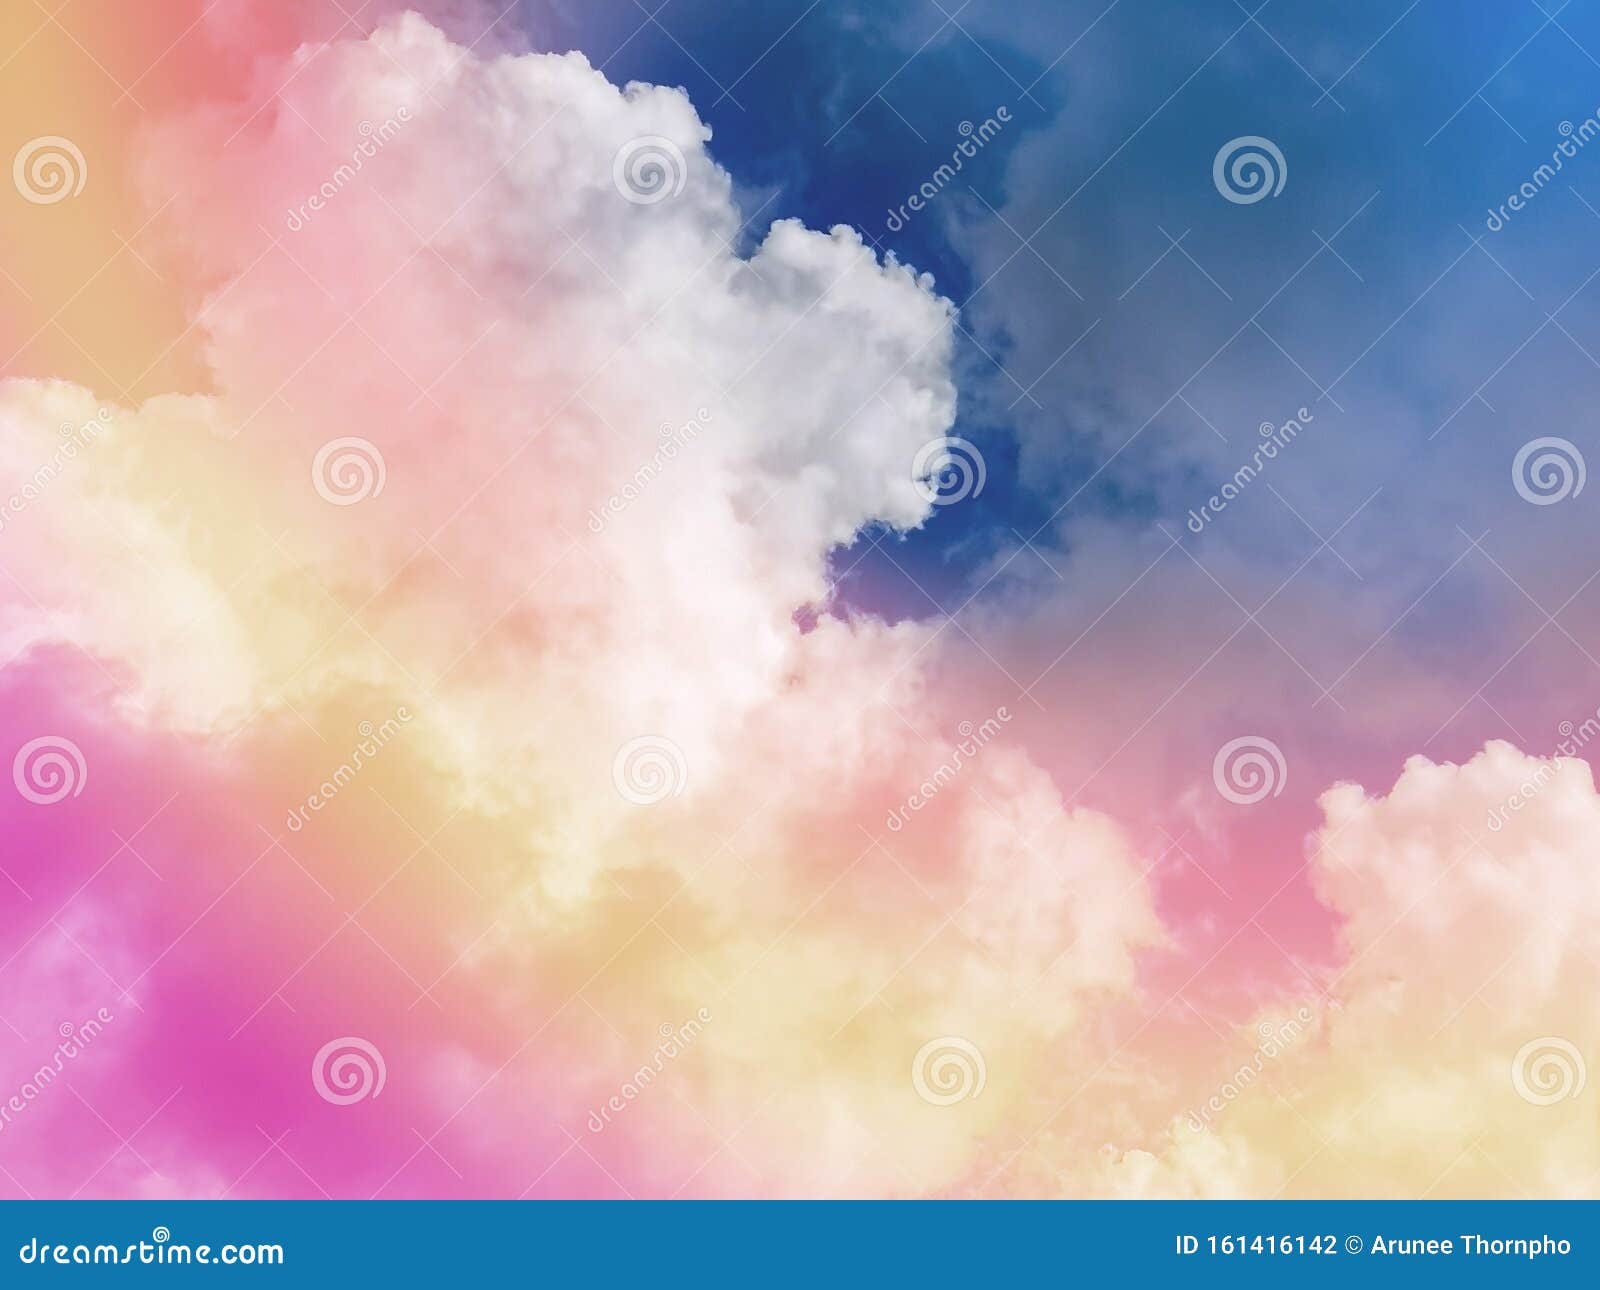 Beautiful Pastel Color with Rainbow Shade on White Fluffy Clouds, Colorful  Blue Sky on Background, Upward View and Copy Space Stock Photo - Image of  background, beautiful: 161416142